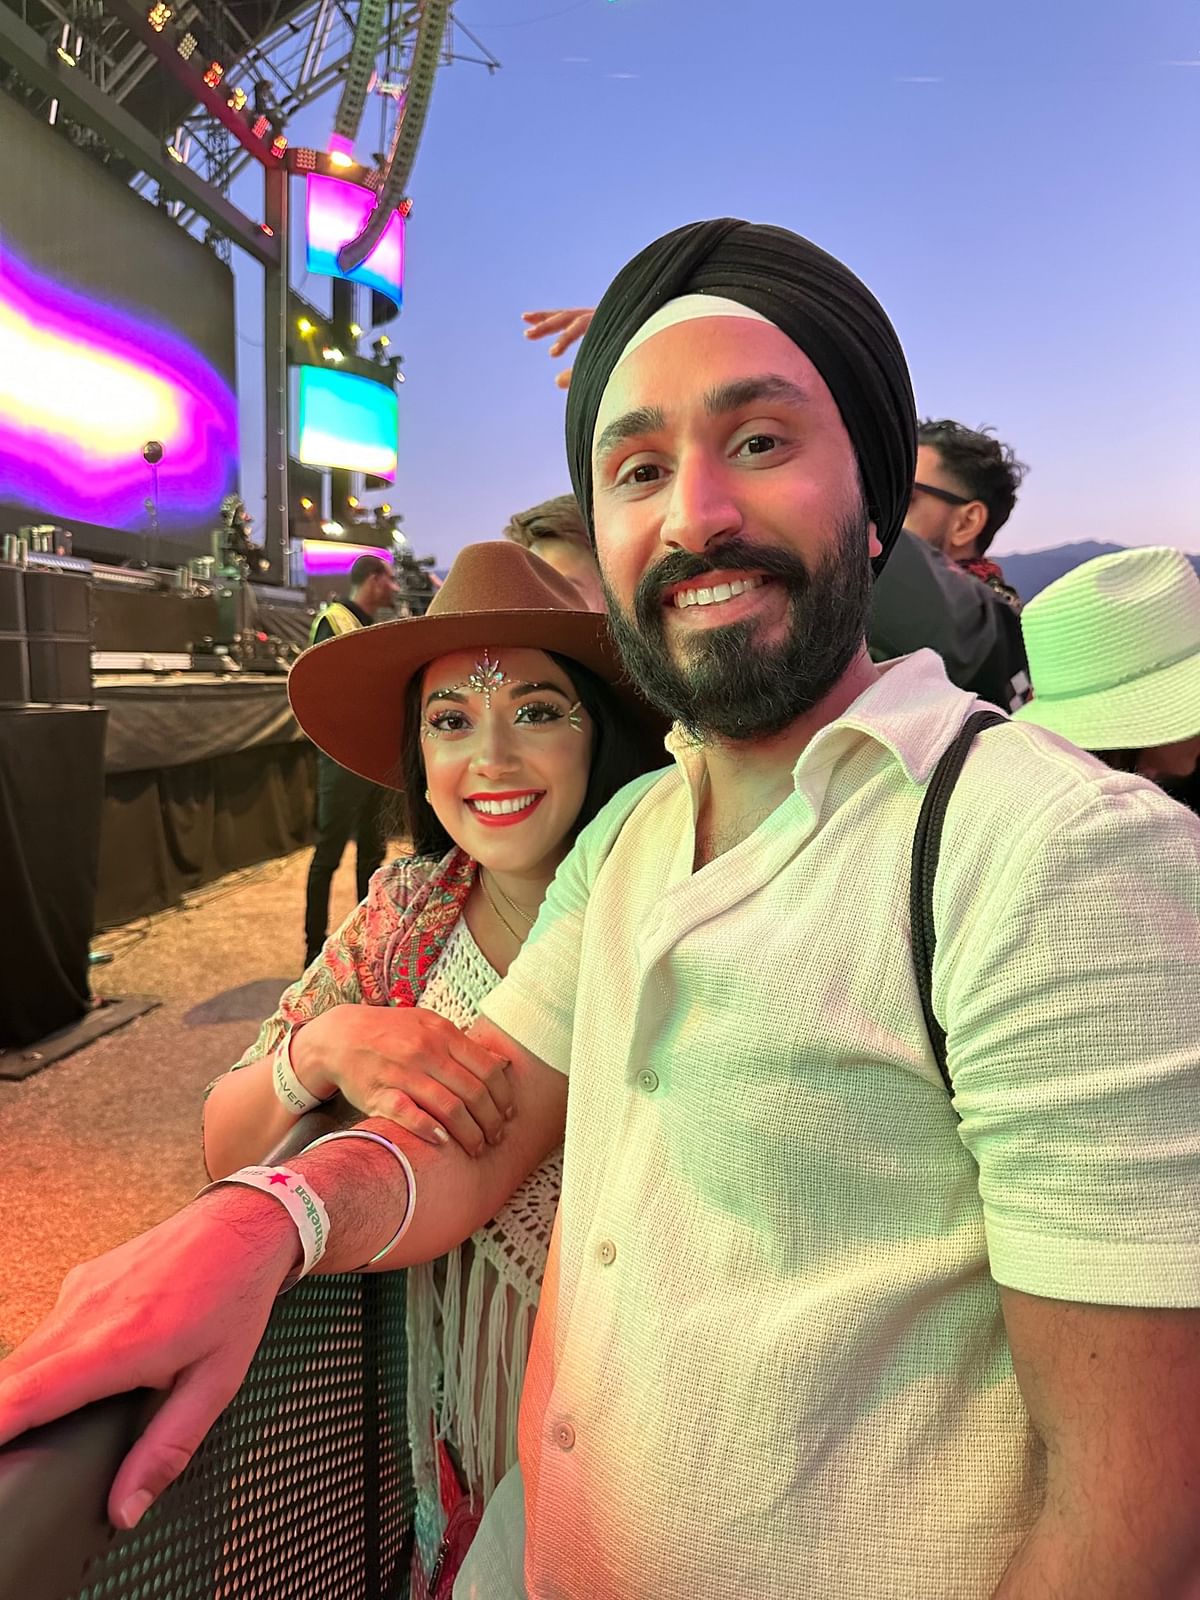 Sarina and Simranjit were in the front row at  Coachella to watch their favourite artist Diljit Dosanjh perform.